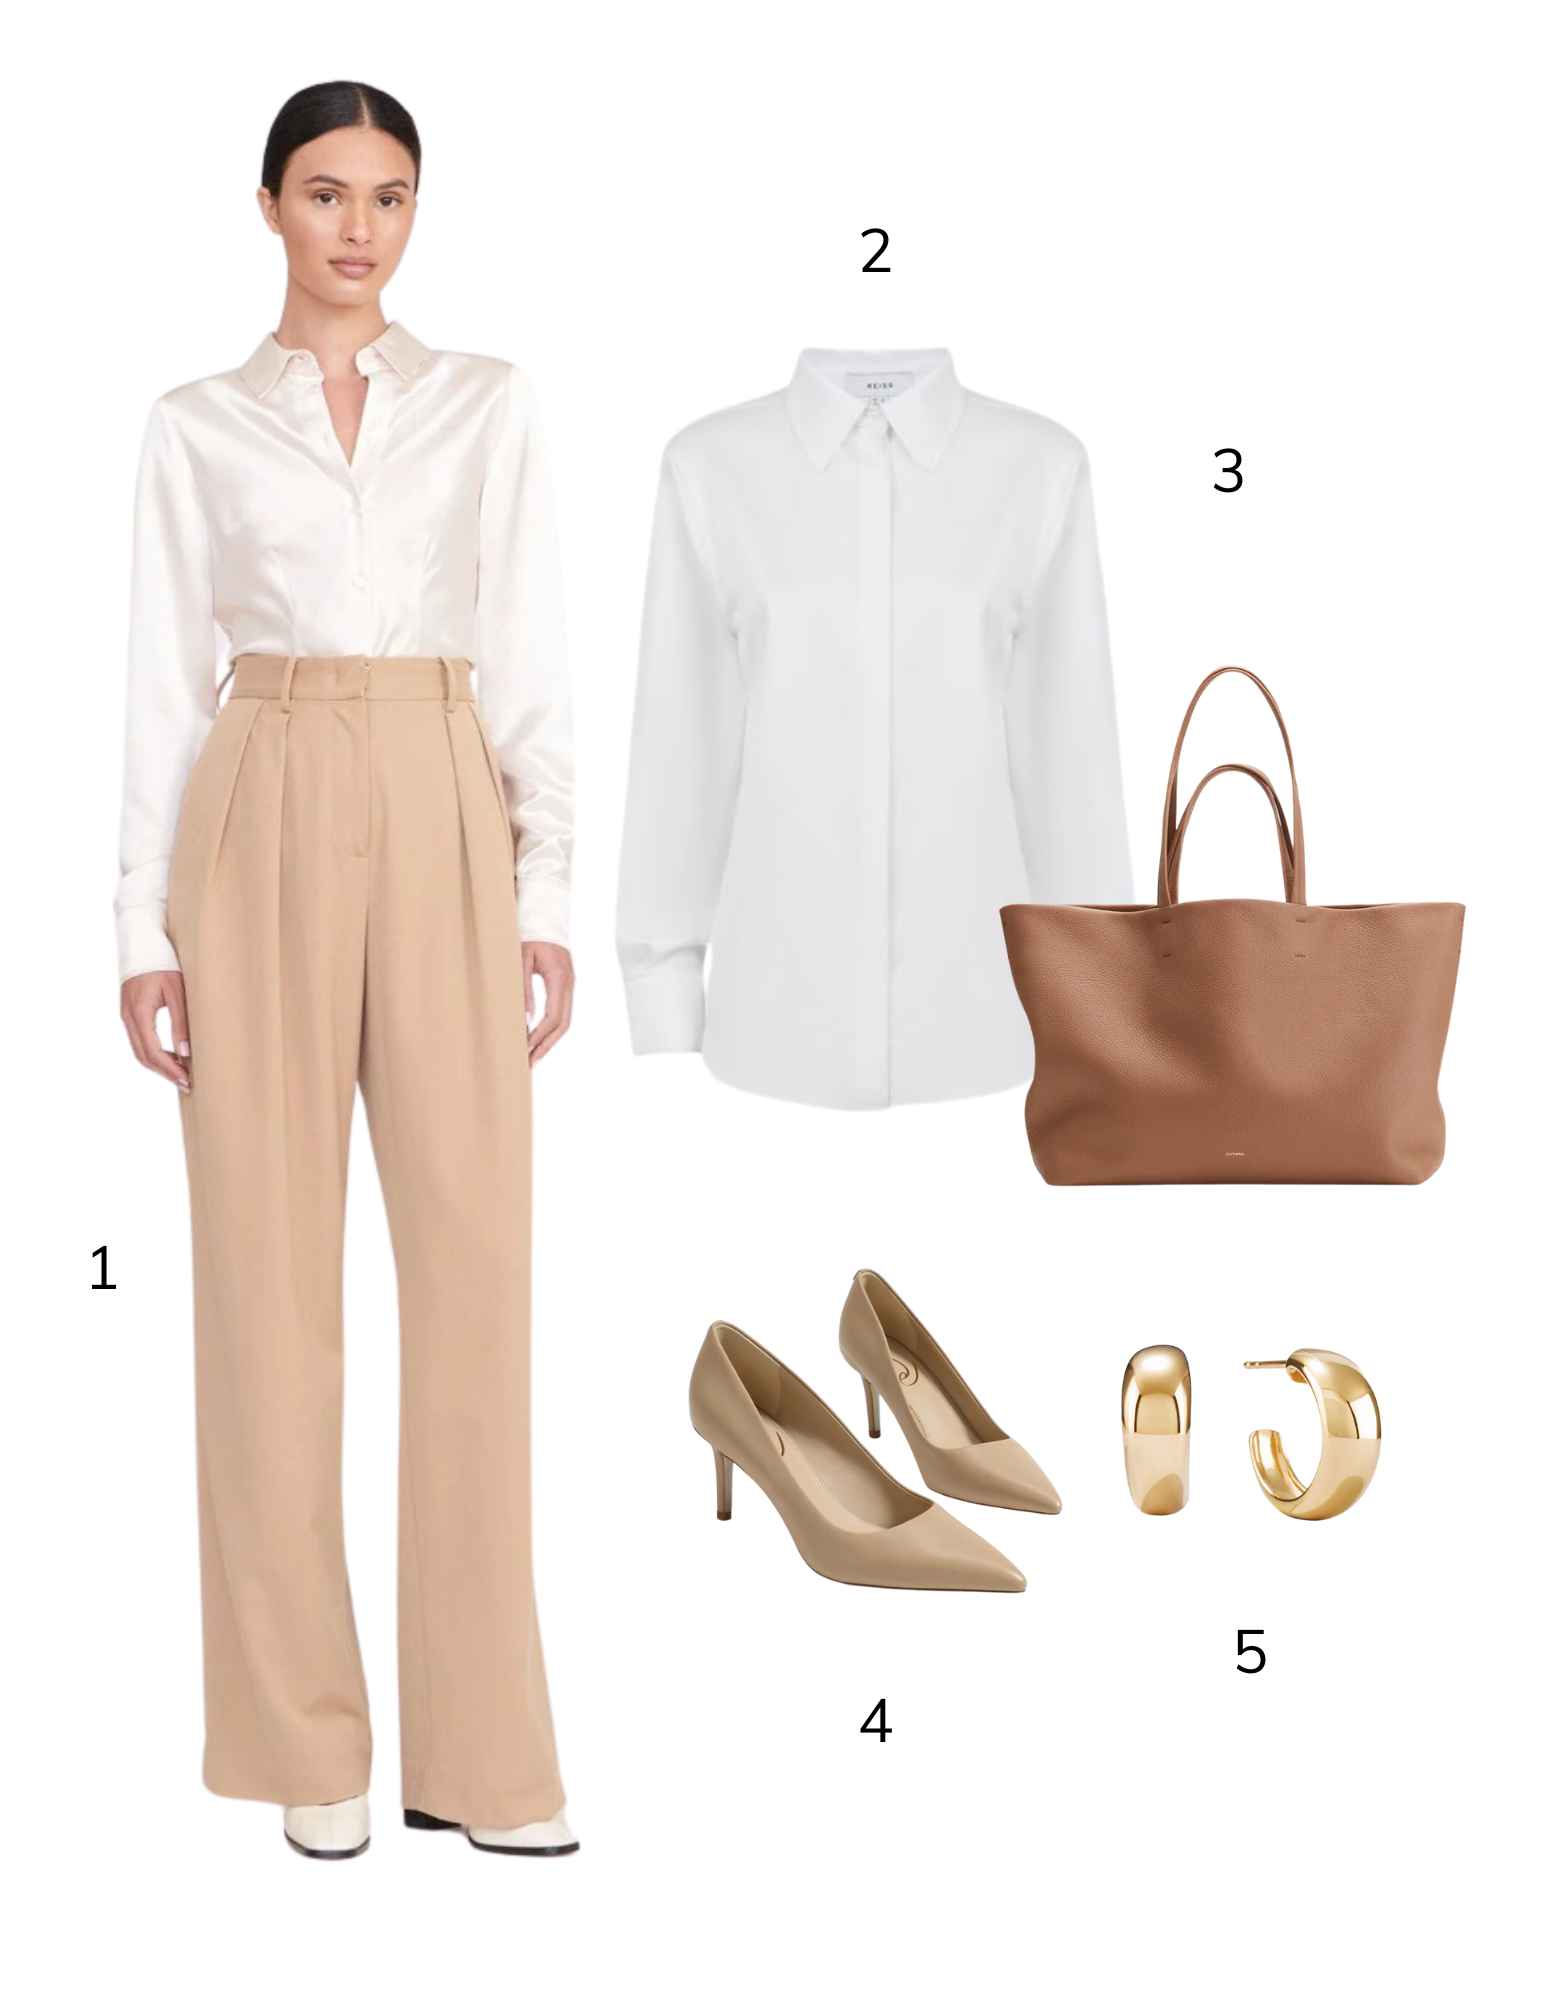 10 Trendy Business Casual Outfits to Wear to Work - kimcollective.com